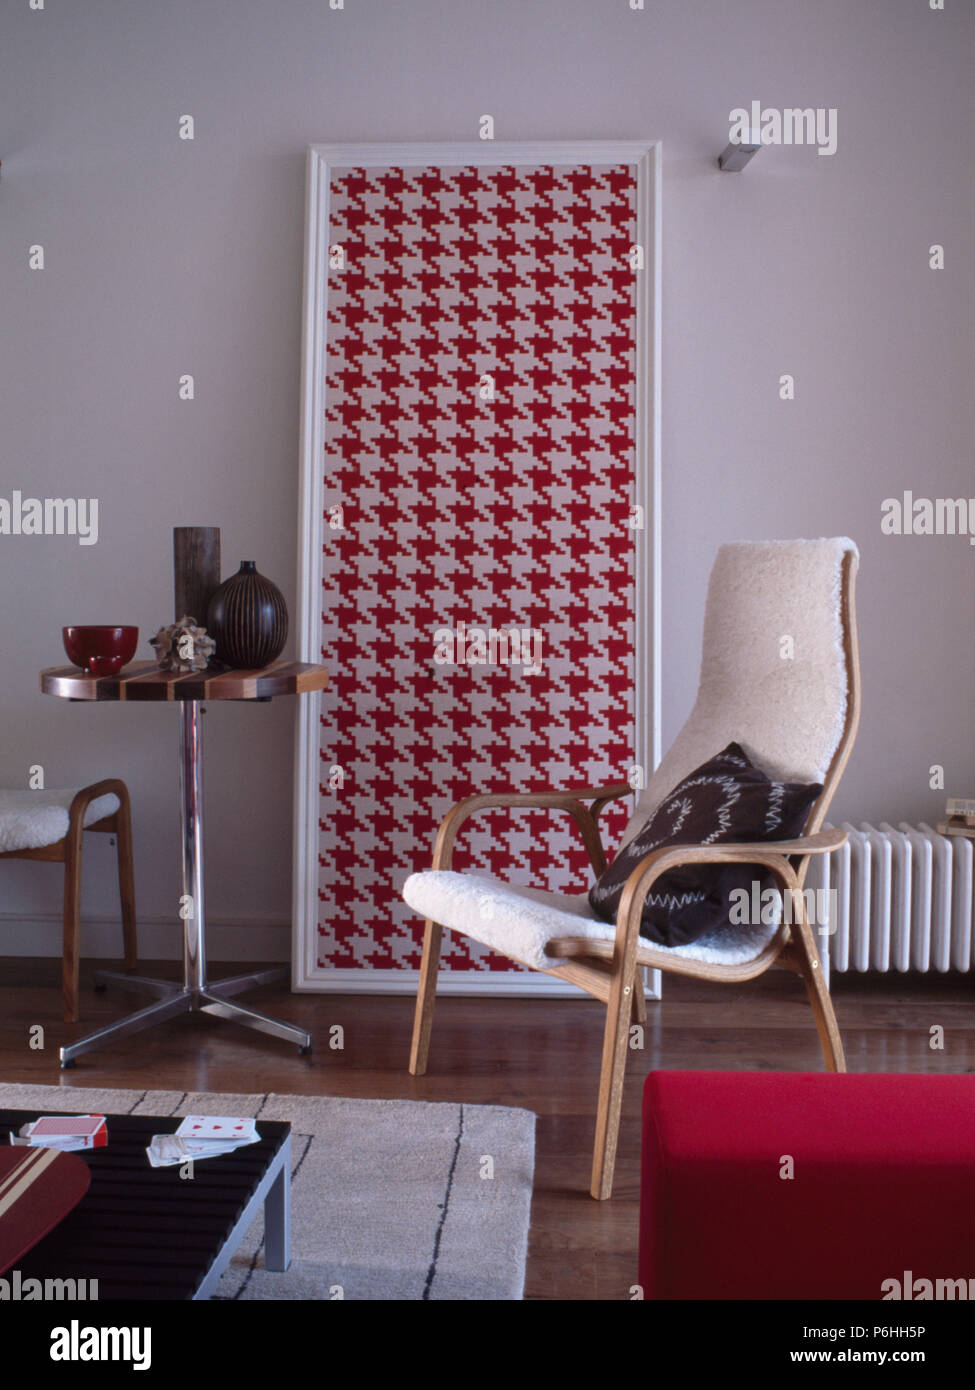 Small circular pedestal table and large red+white houndstooth picture in living room with wooden-framed chair Stock Photo